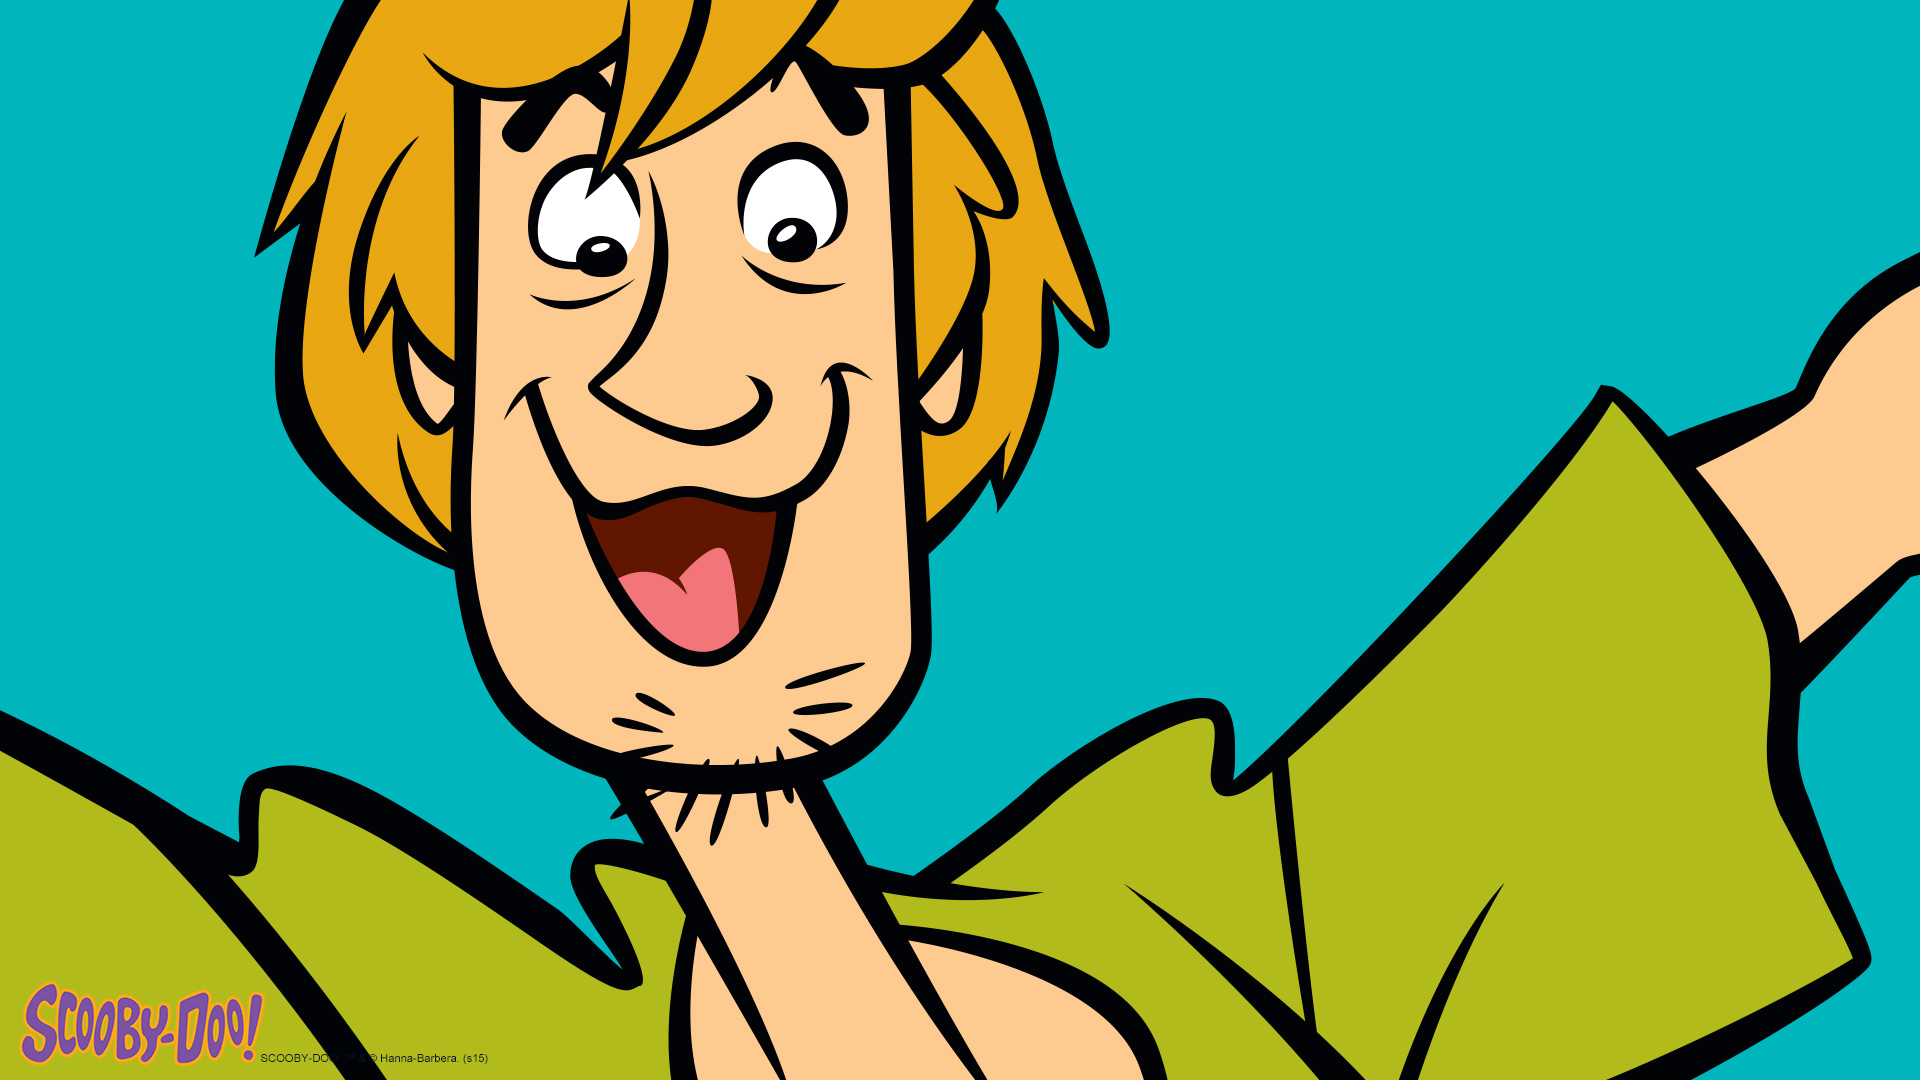 Shaggy Wallpapers